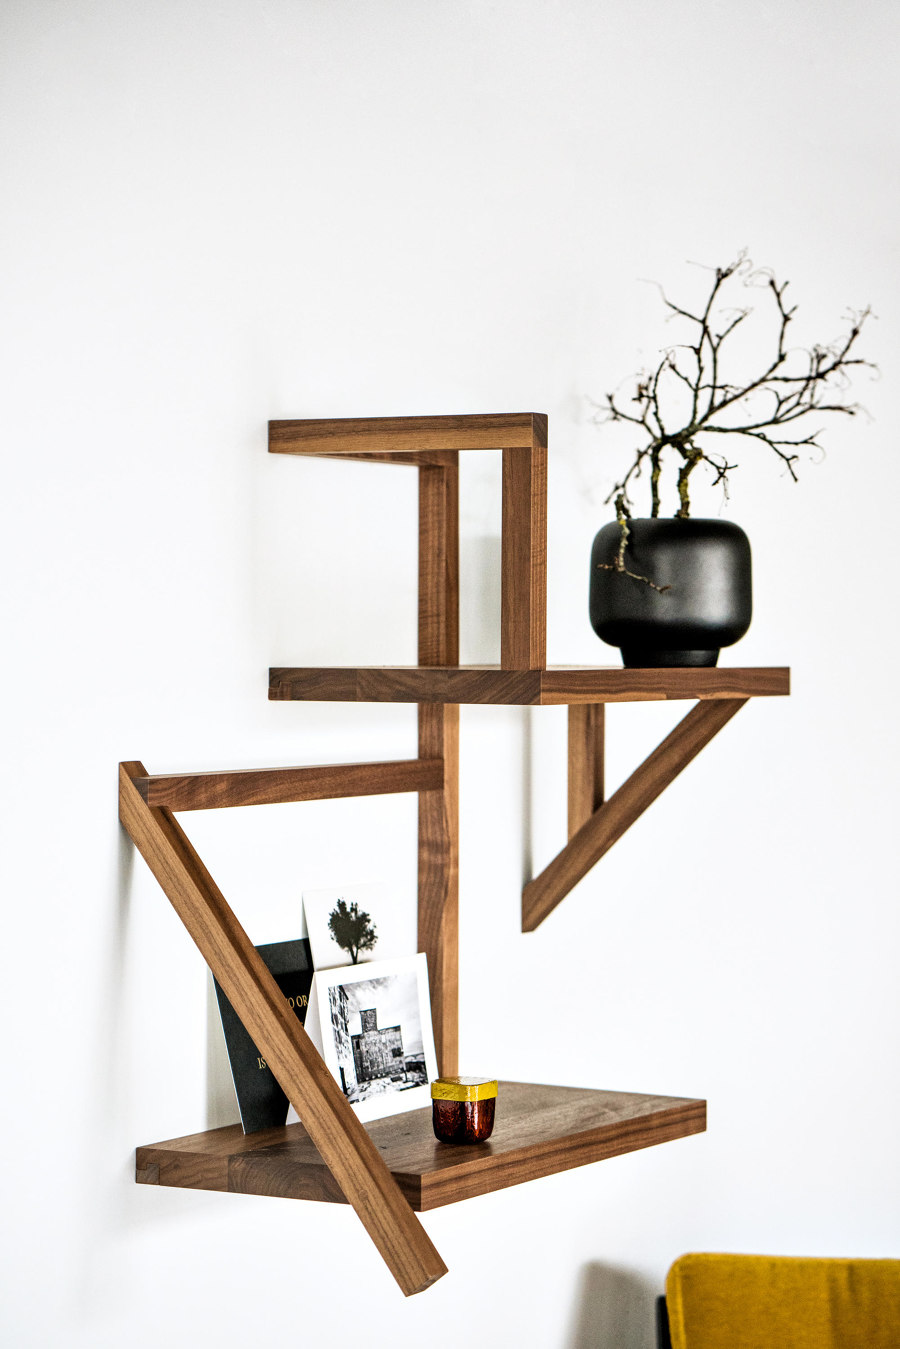 Working with wood – ten examples of solid wood furniture | News